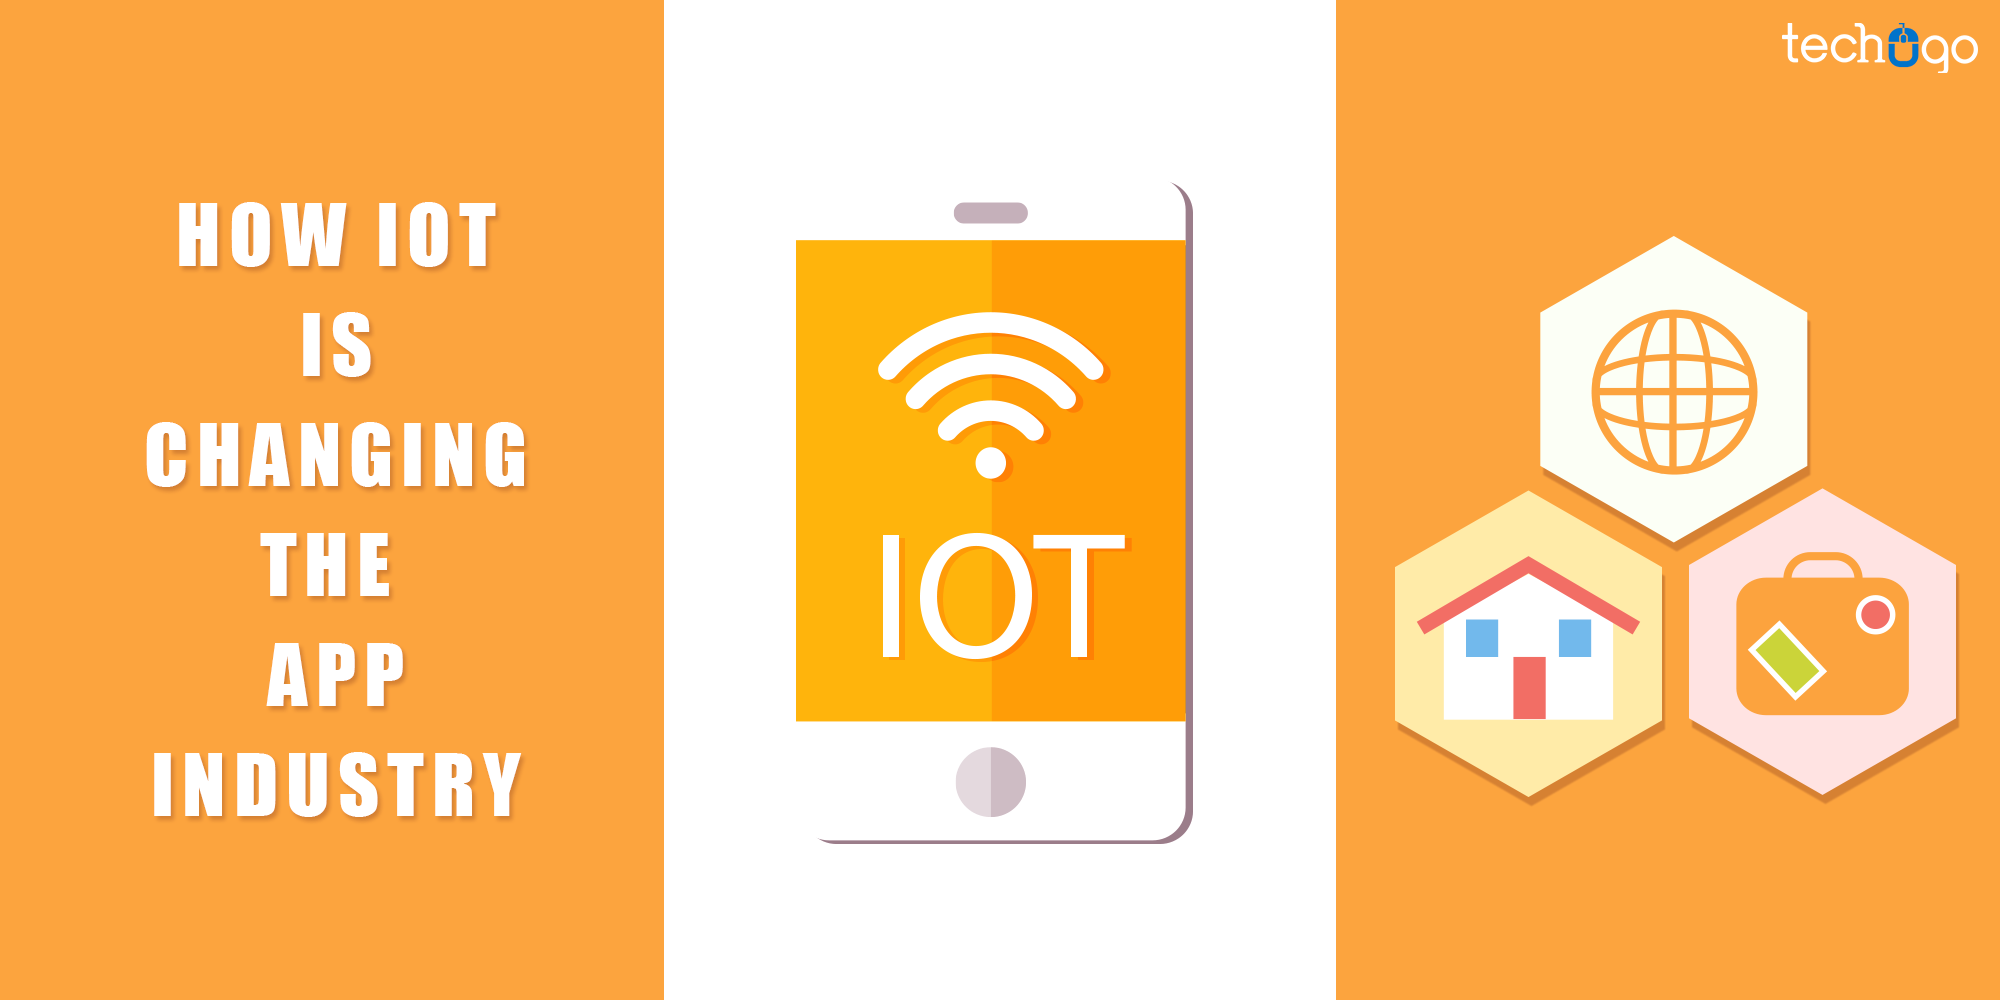 How IOT Is Changing The App Industry